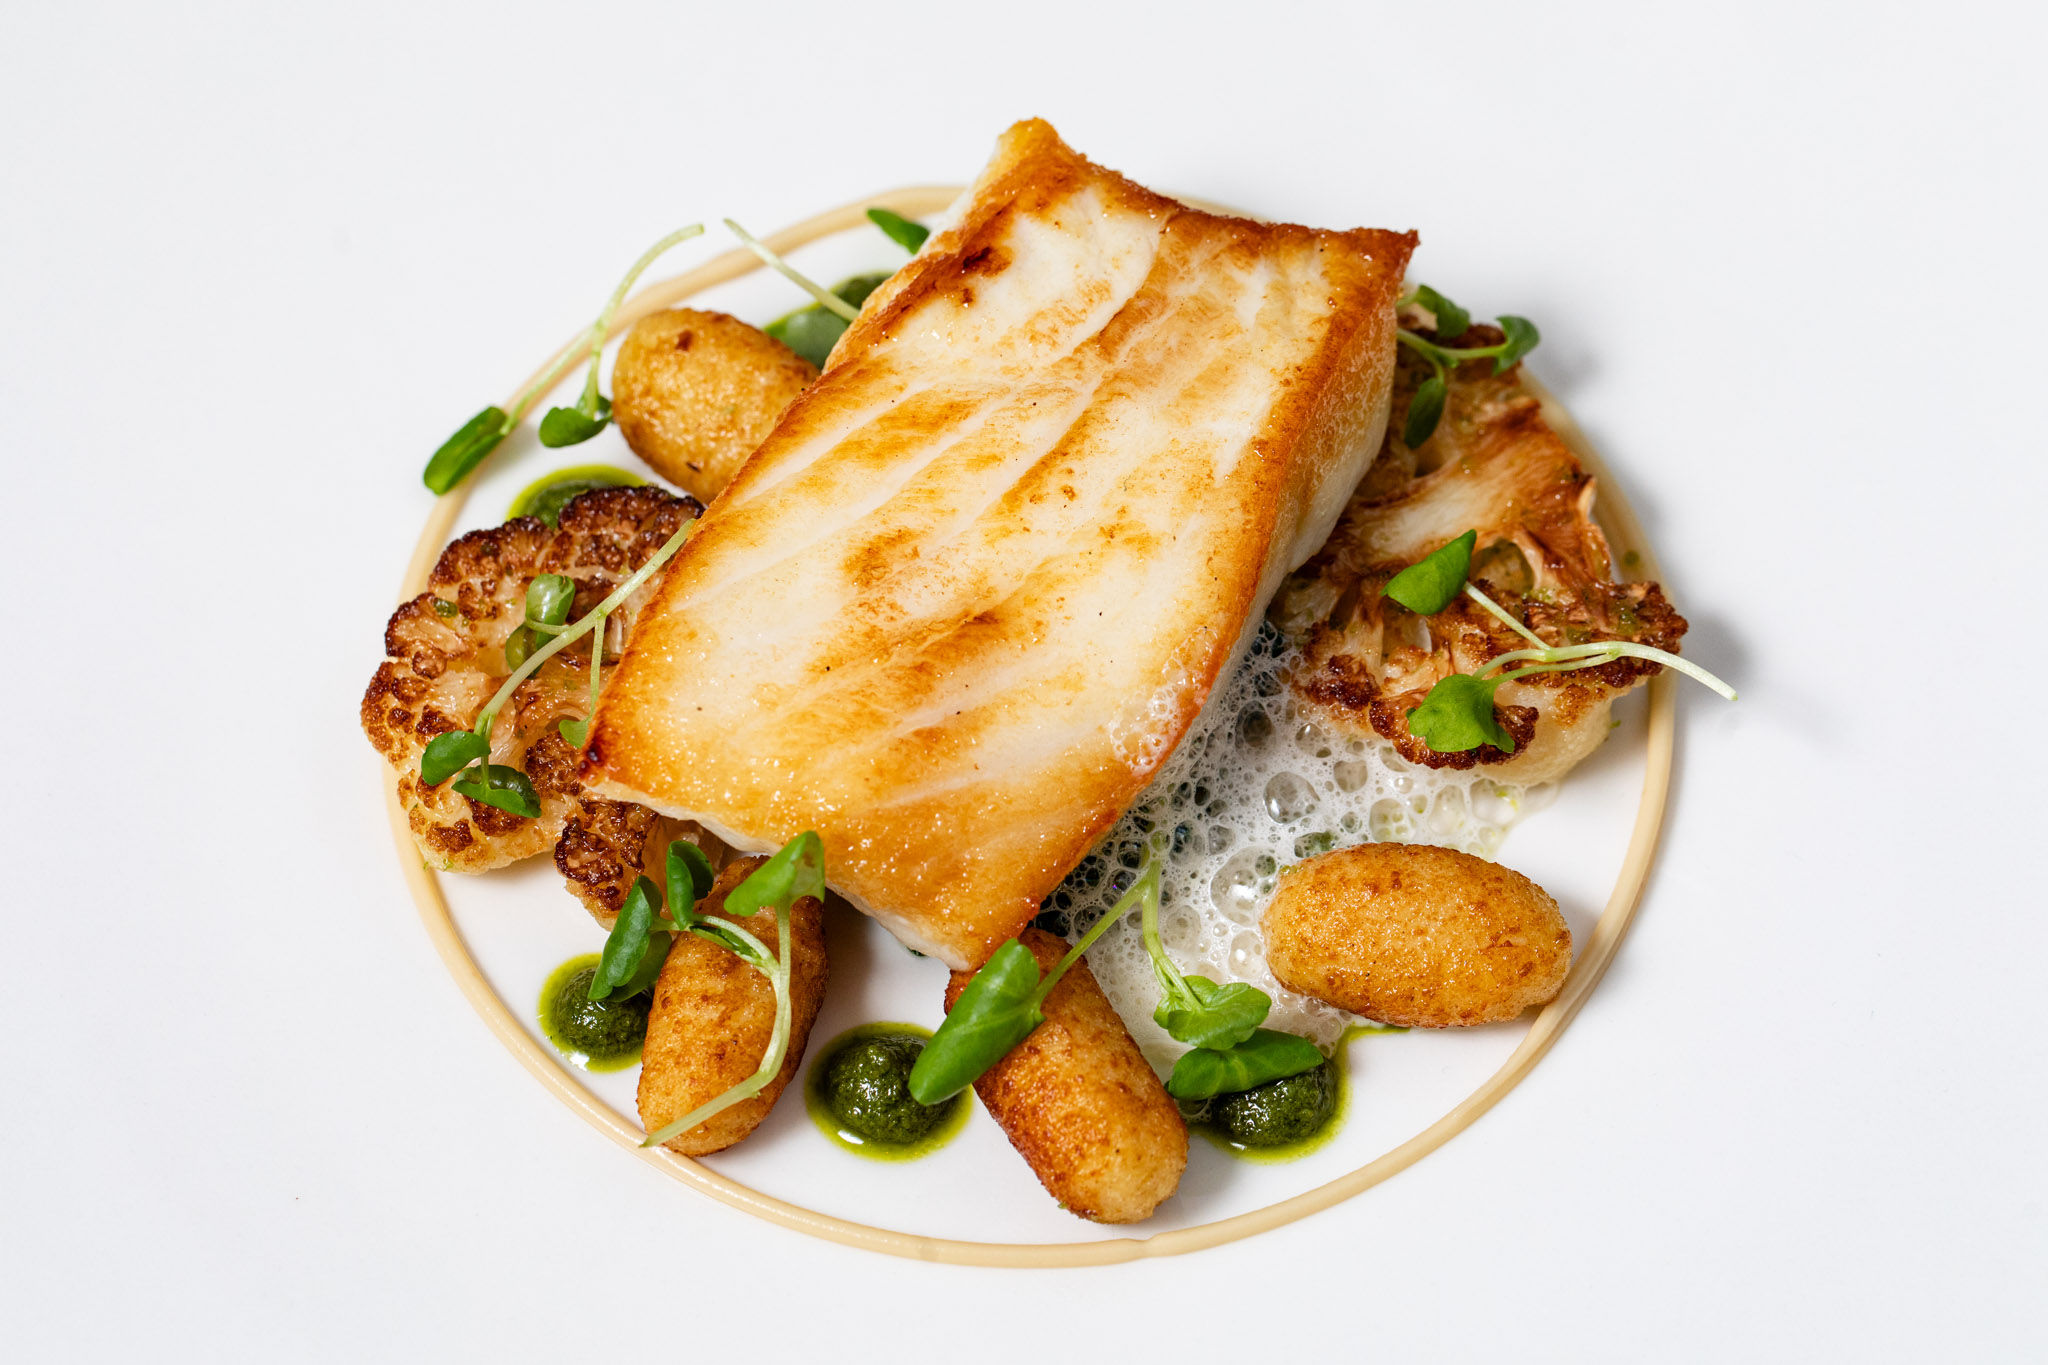 A plate of fish with garnishes and microgreens served in the centre of a white plate.